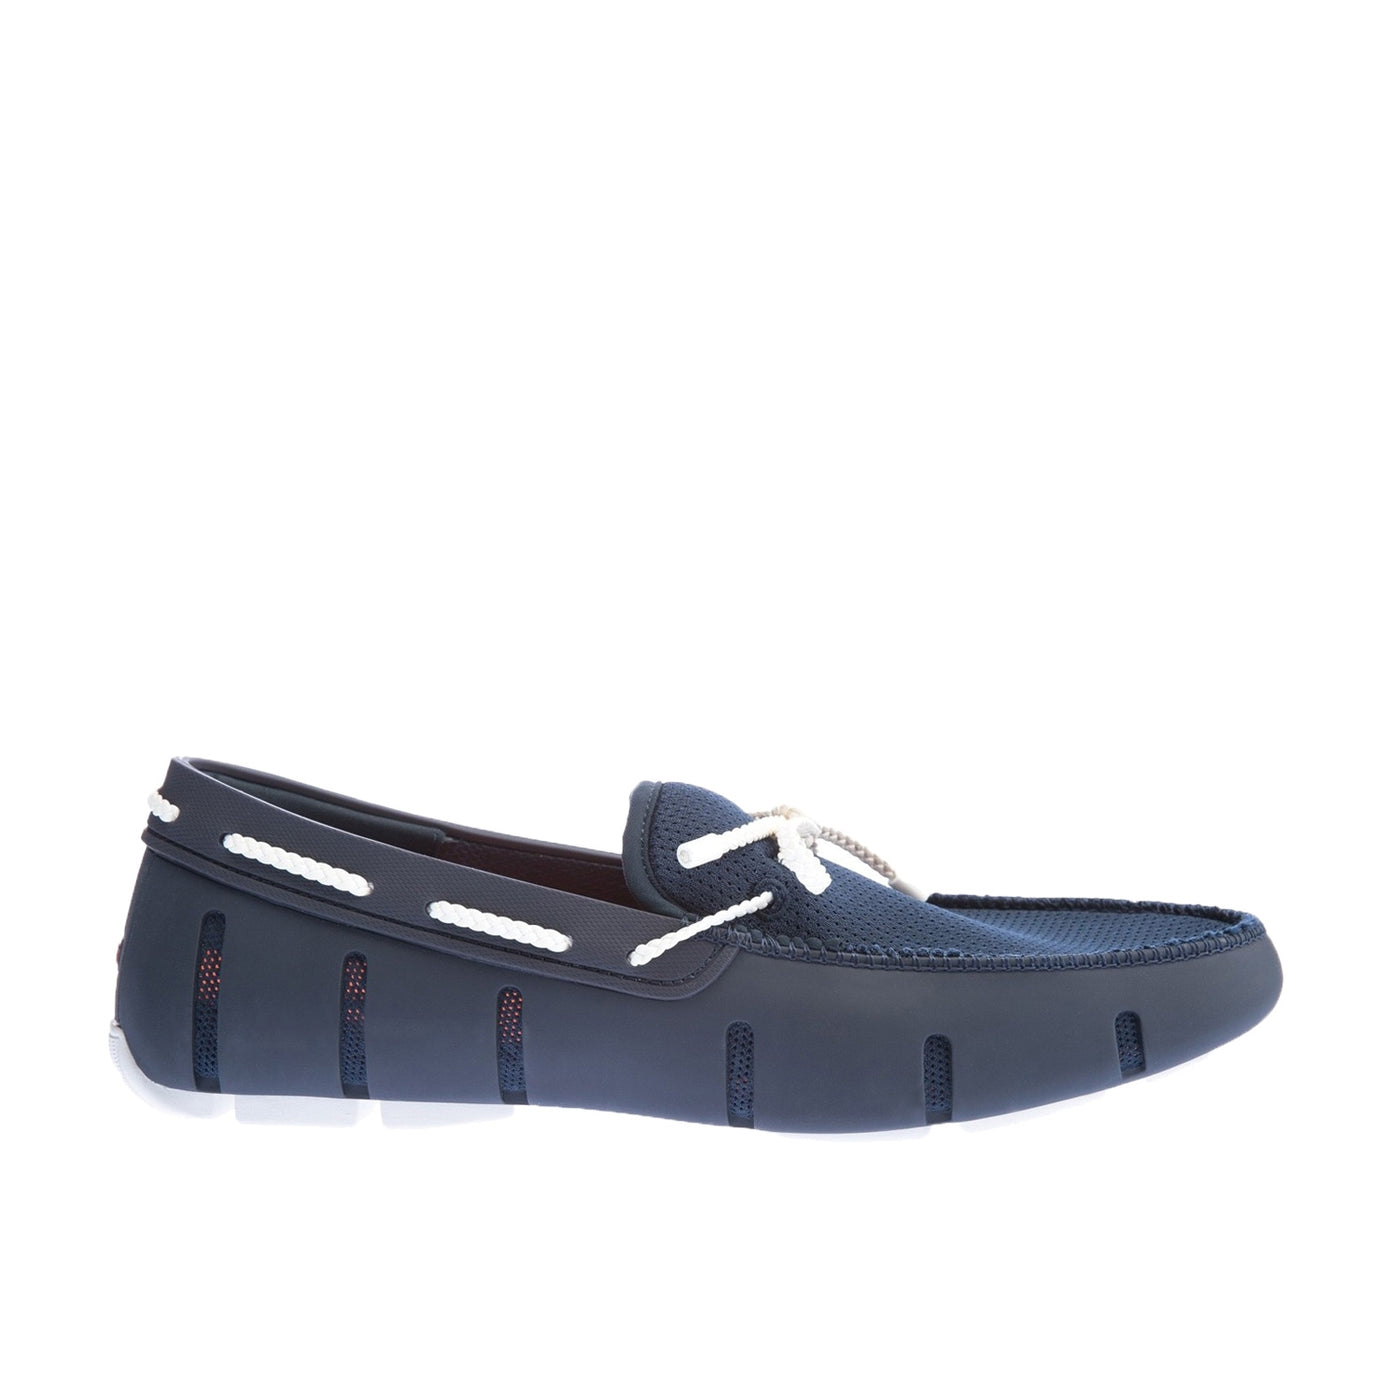 Swims Braided Lace Loafer Shoe in Navy & White